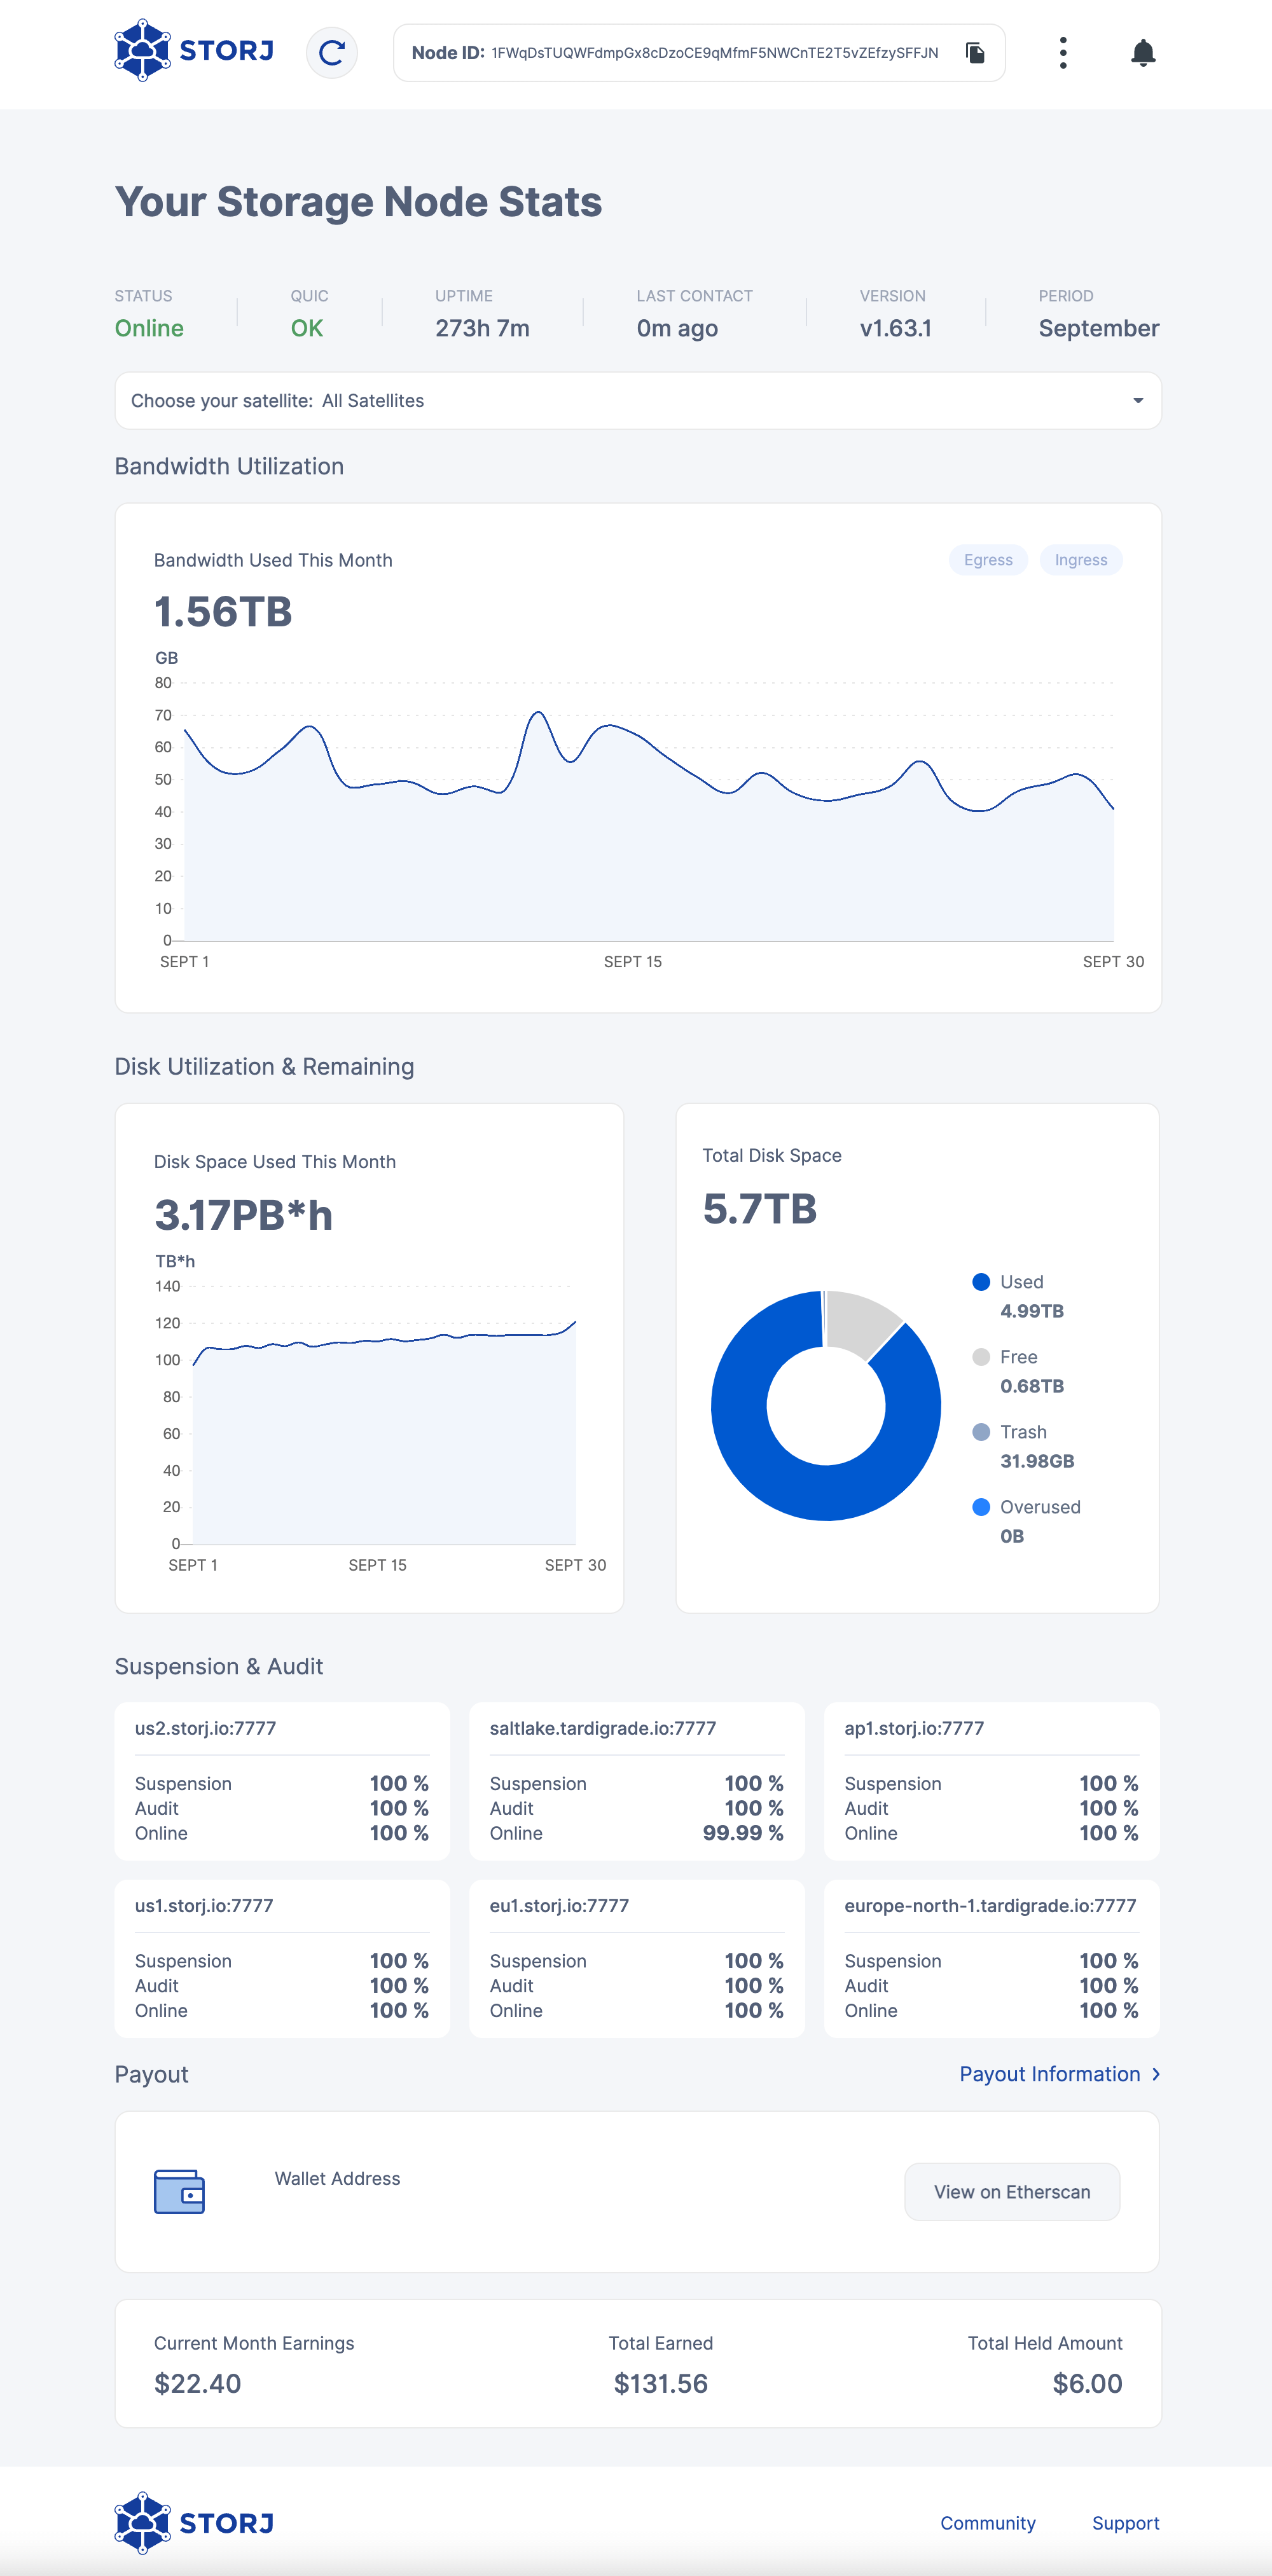 Storj Dashboard end of September 2022. Bandwidth used: 1.56 TB. Hours of storage used: 3.17 PB*h. Total available storage: 5.7 TB. Used storage: 4.99 TB. Free disk space: 0.68 TB. Recycle bin: 31.98 GB. Earnings this month: $22.40. Total earnings: $131.56. Withheld earnings: $6.